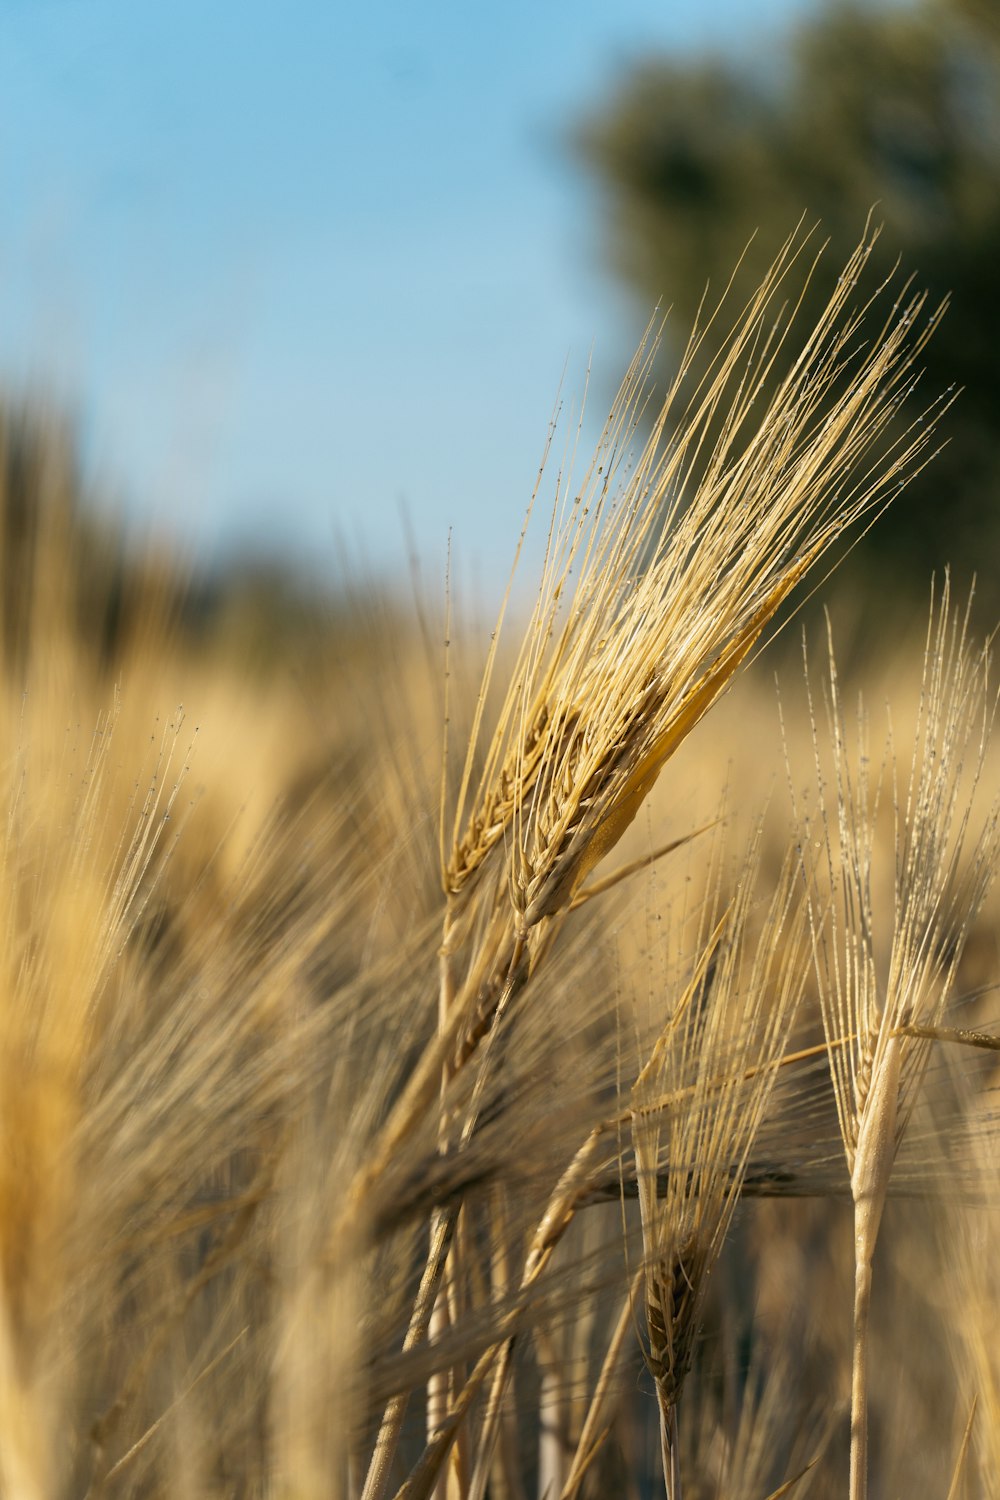 a close up of a wheat field with trees in the background